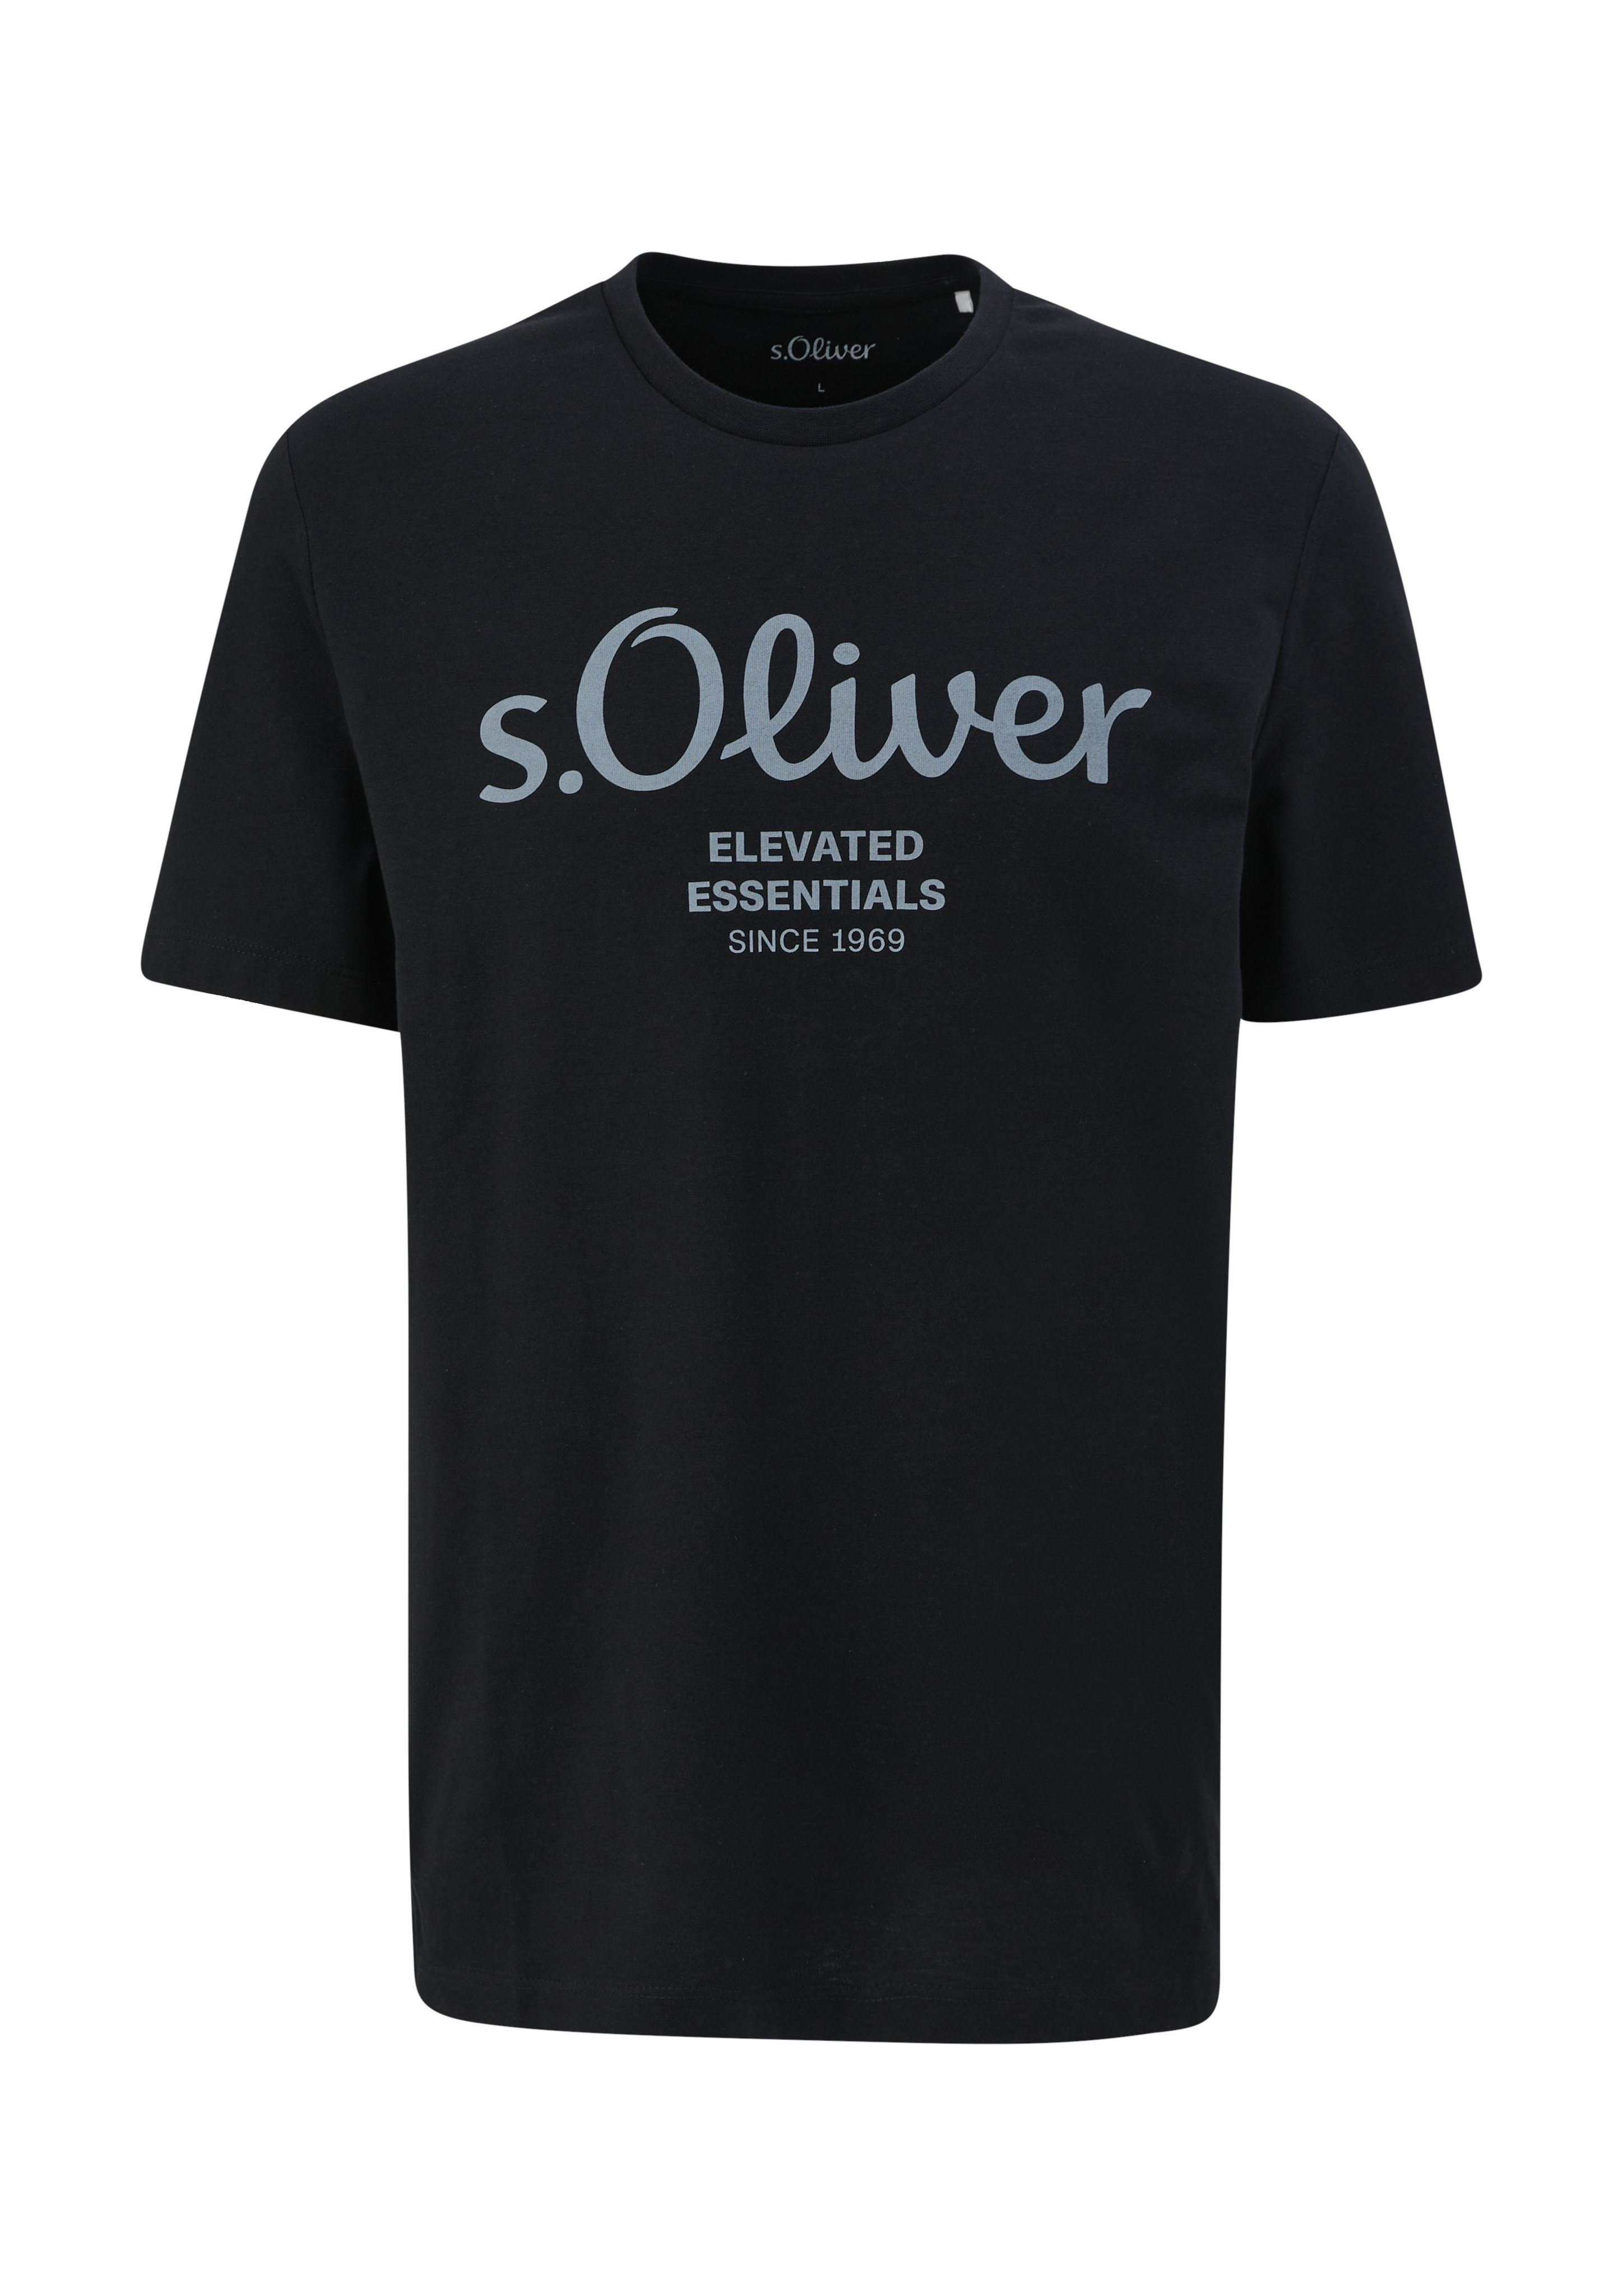 s.Oliver T-Shirt im sportiven black Look